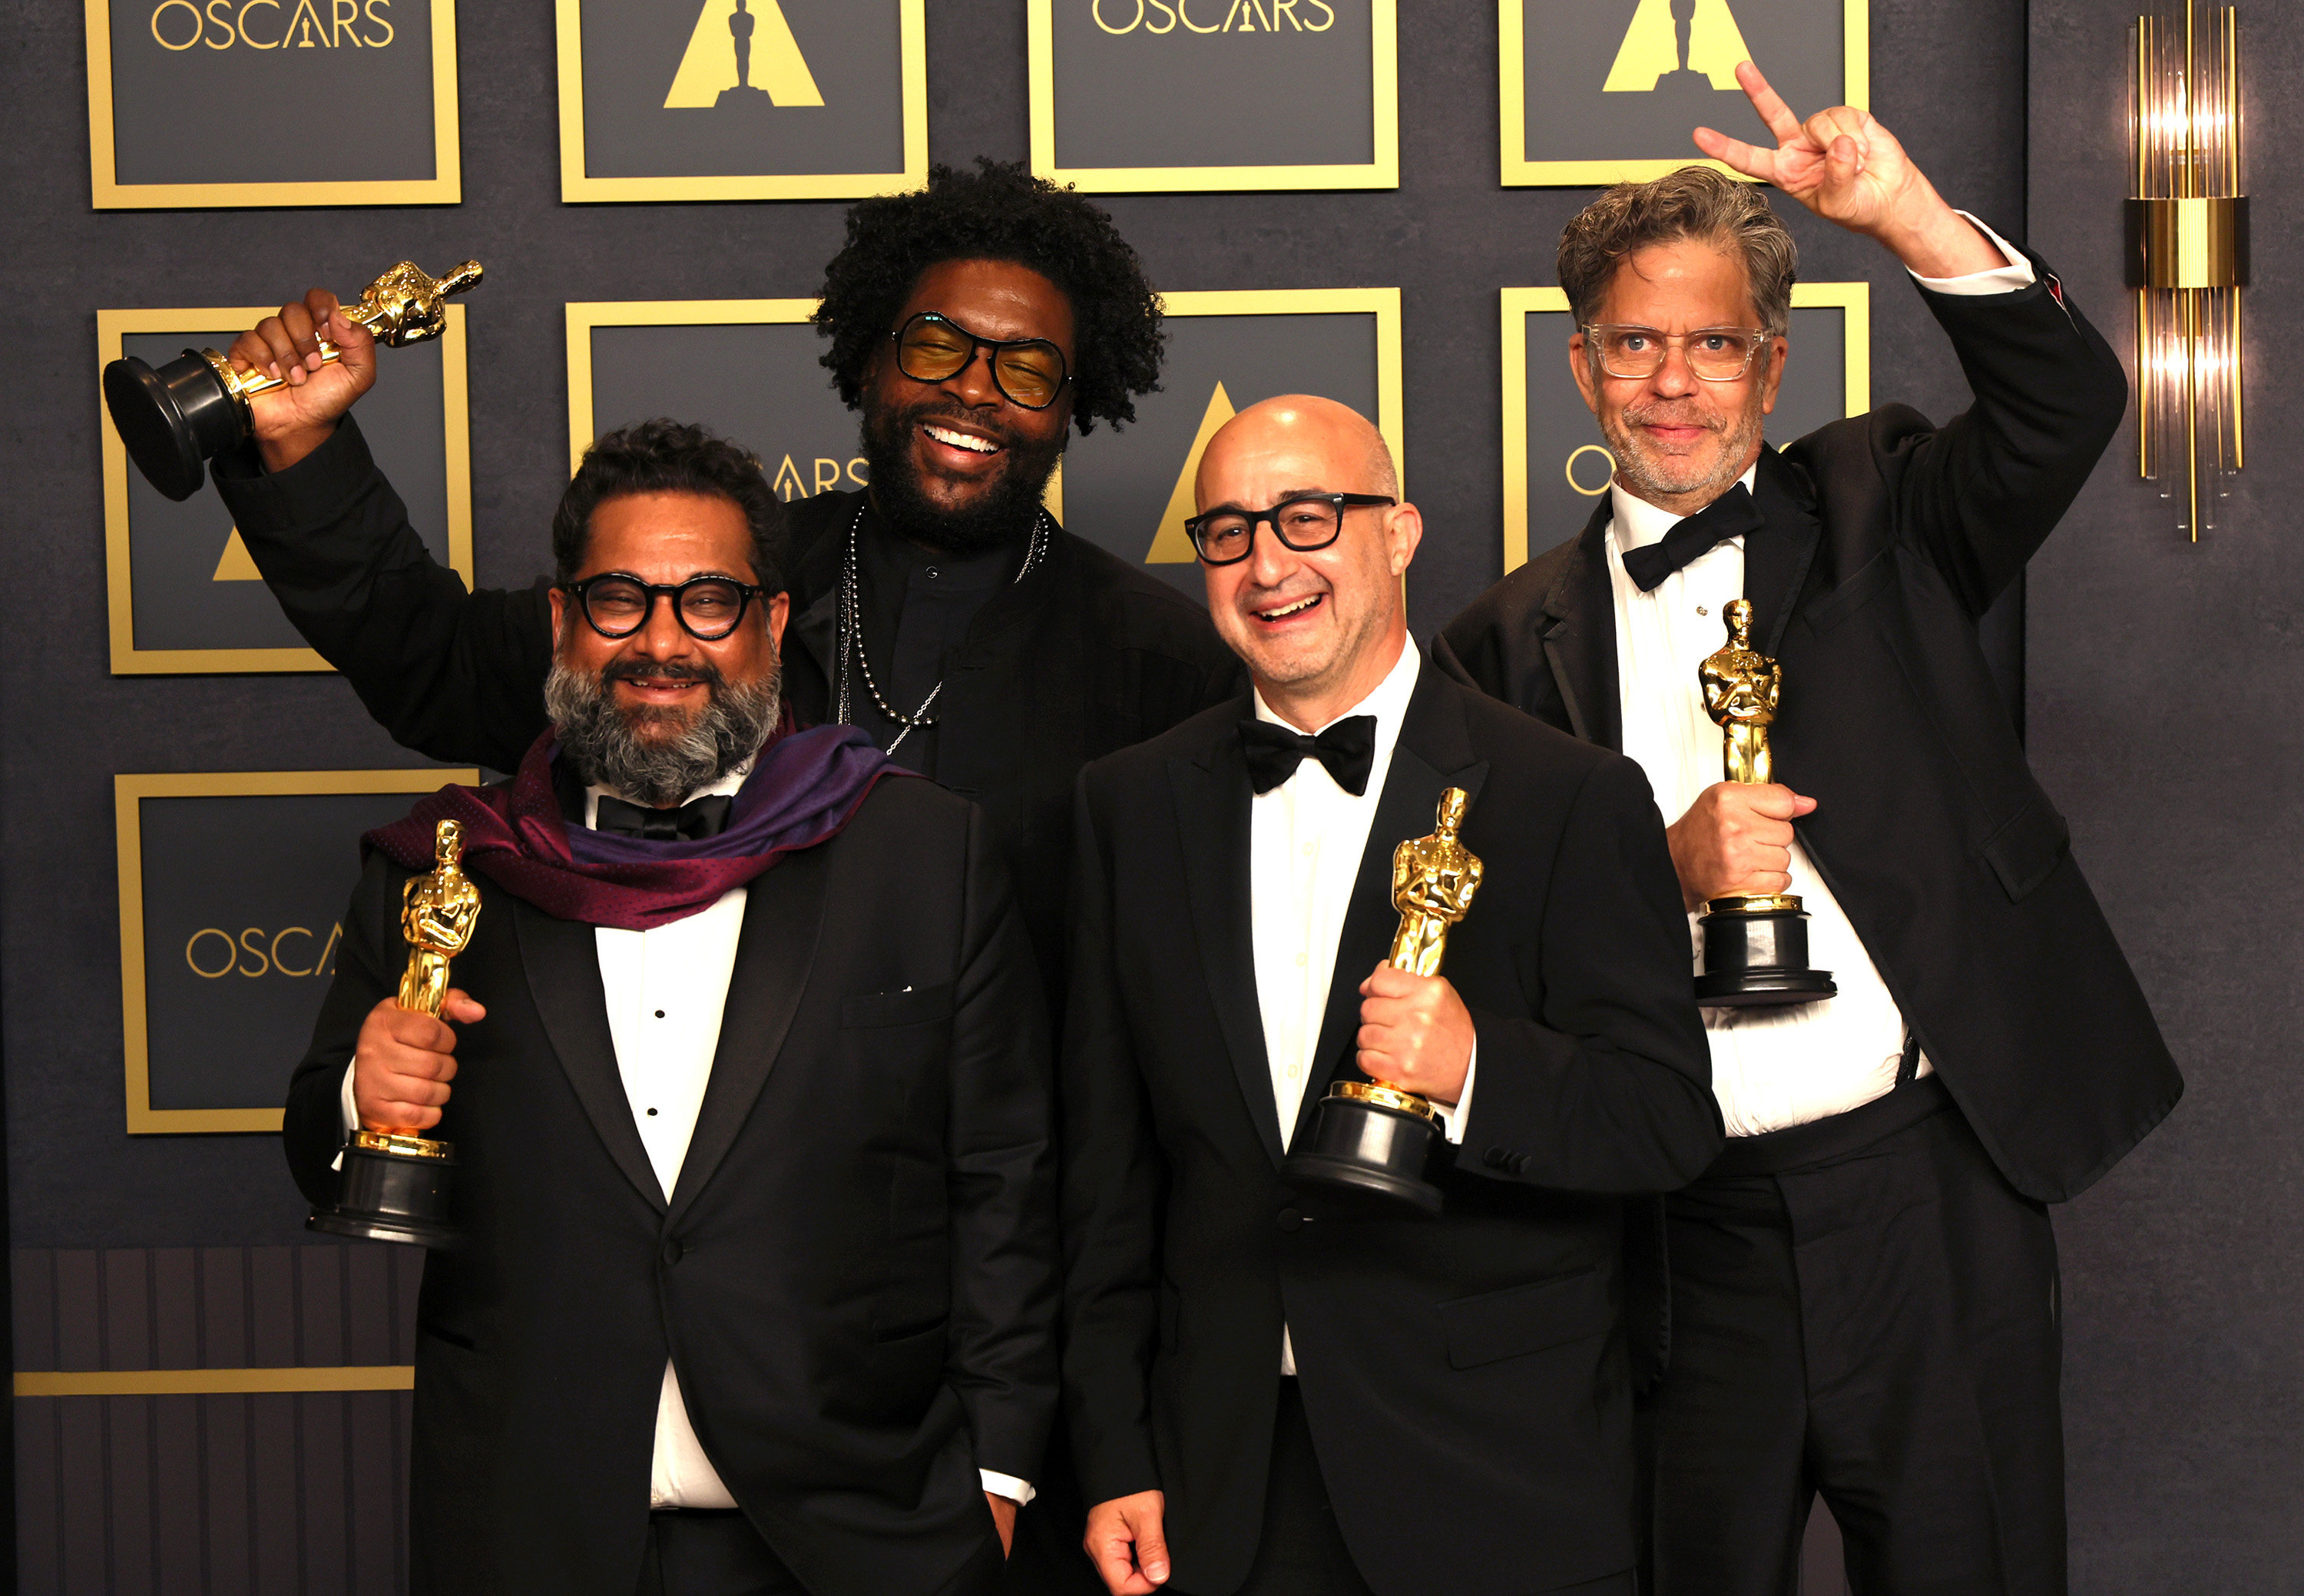 Questlove (second from left) with co-creators of Summer of Soul at the Oscars. Onyx, a Disney content arm which worked on the documentary, is helping tell diverse stories at a time when Hollywood’s inclusivity is in question. Photo: Getty Images